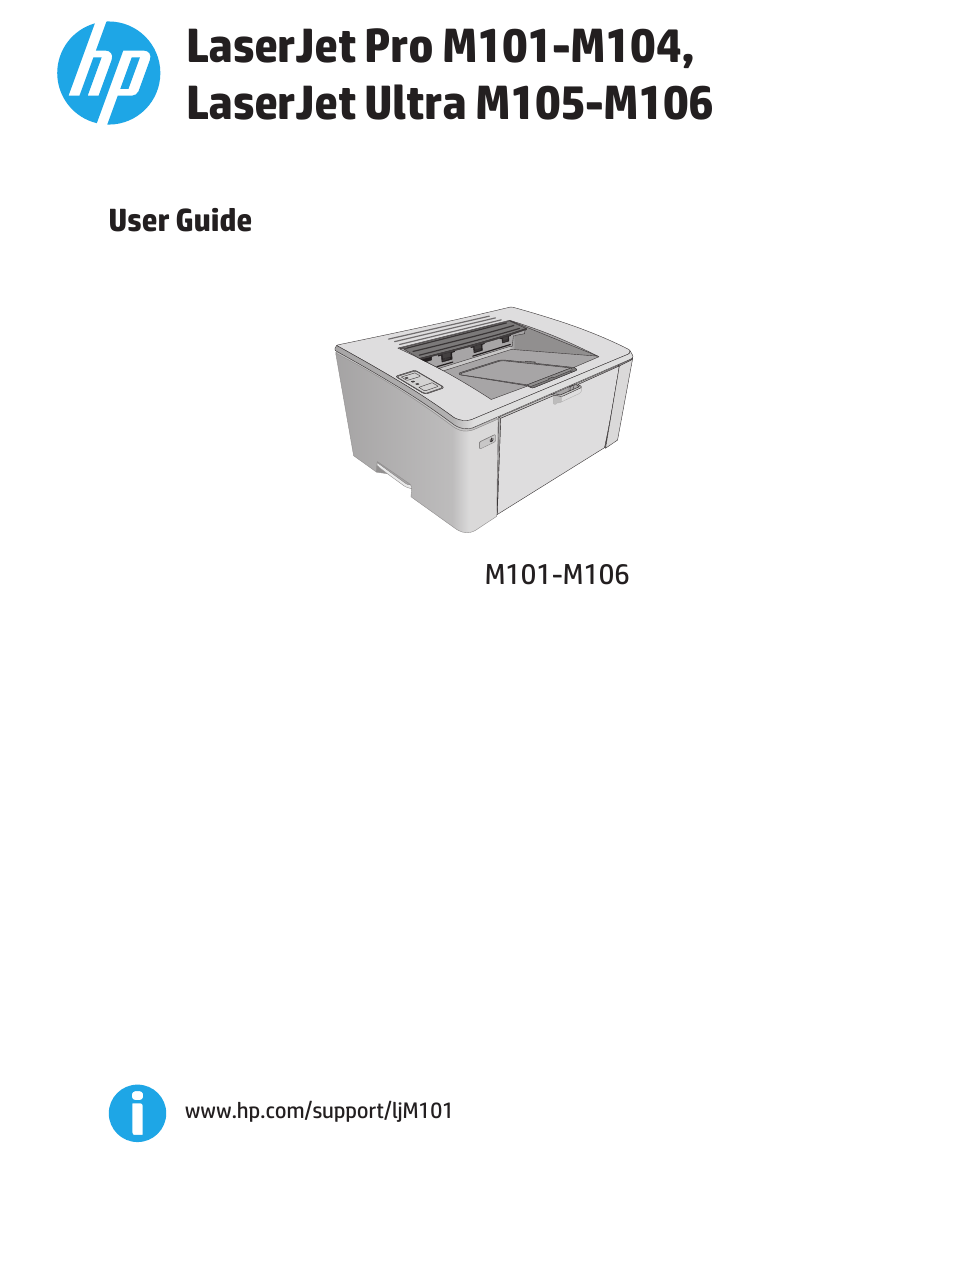 HP LaserJet Ultra M106w User Manual | 110 pages | Also for: LaserJet Ultra  M105, LaserJet Pro M101, LaserJet Pro M102, LaserJet Pro M103, LaserJet Pro  M104